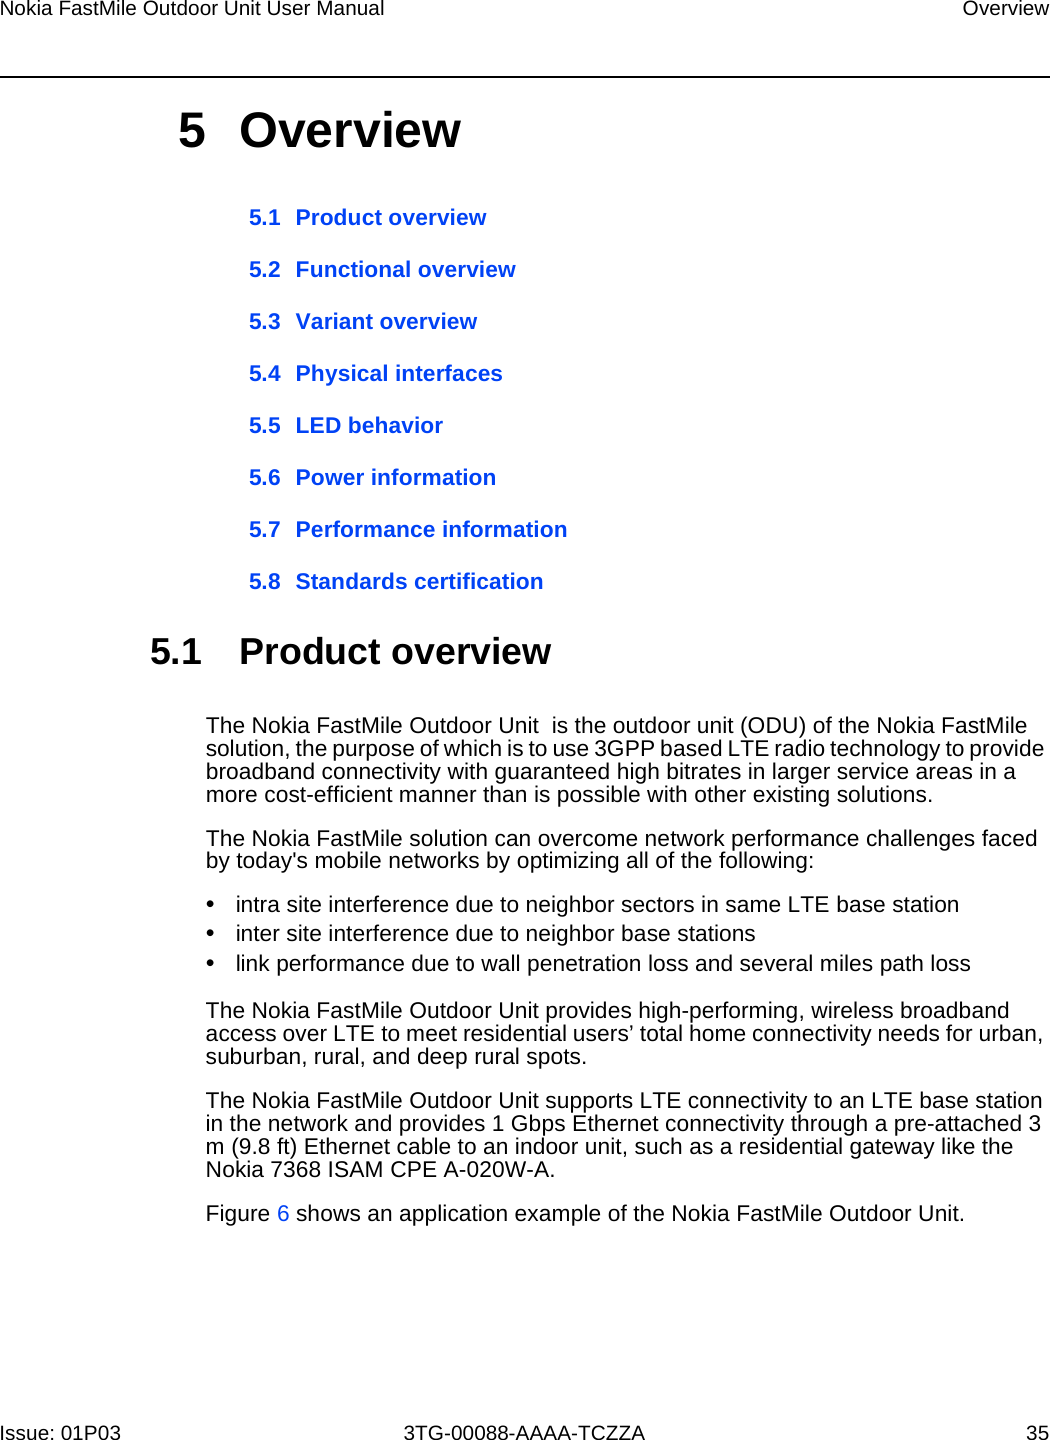 Page 31 of Nokia Bell 34003800FM20 FastMile Compact User Manual Nokia FastMile Outdoor Unit